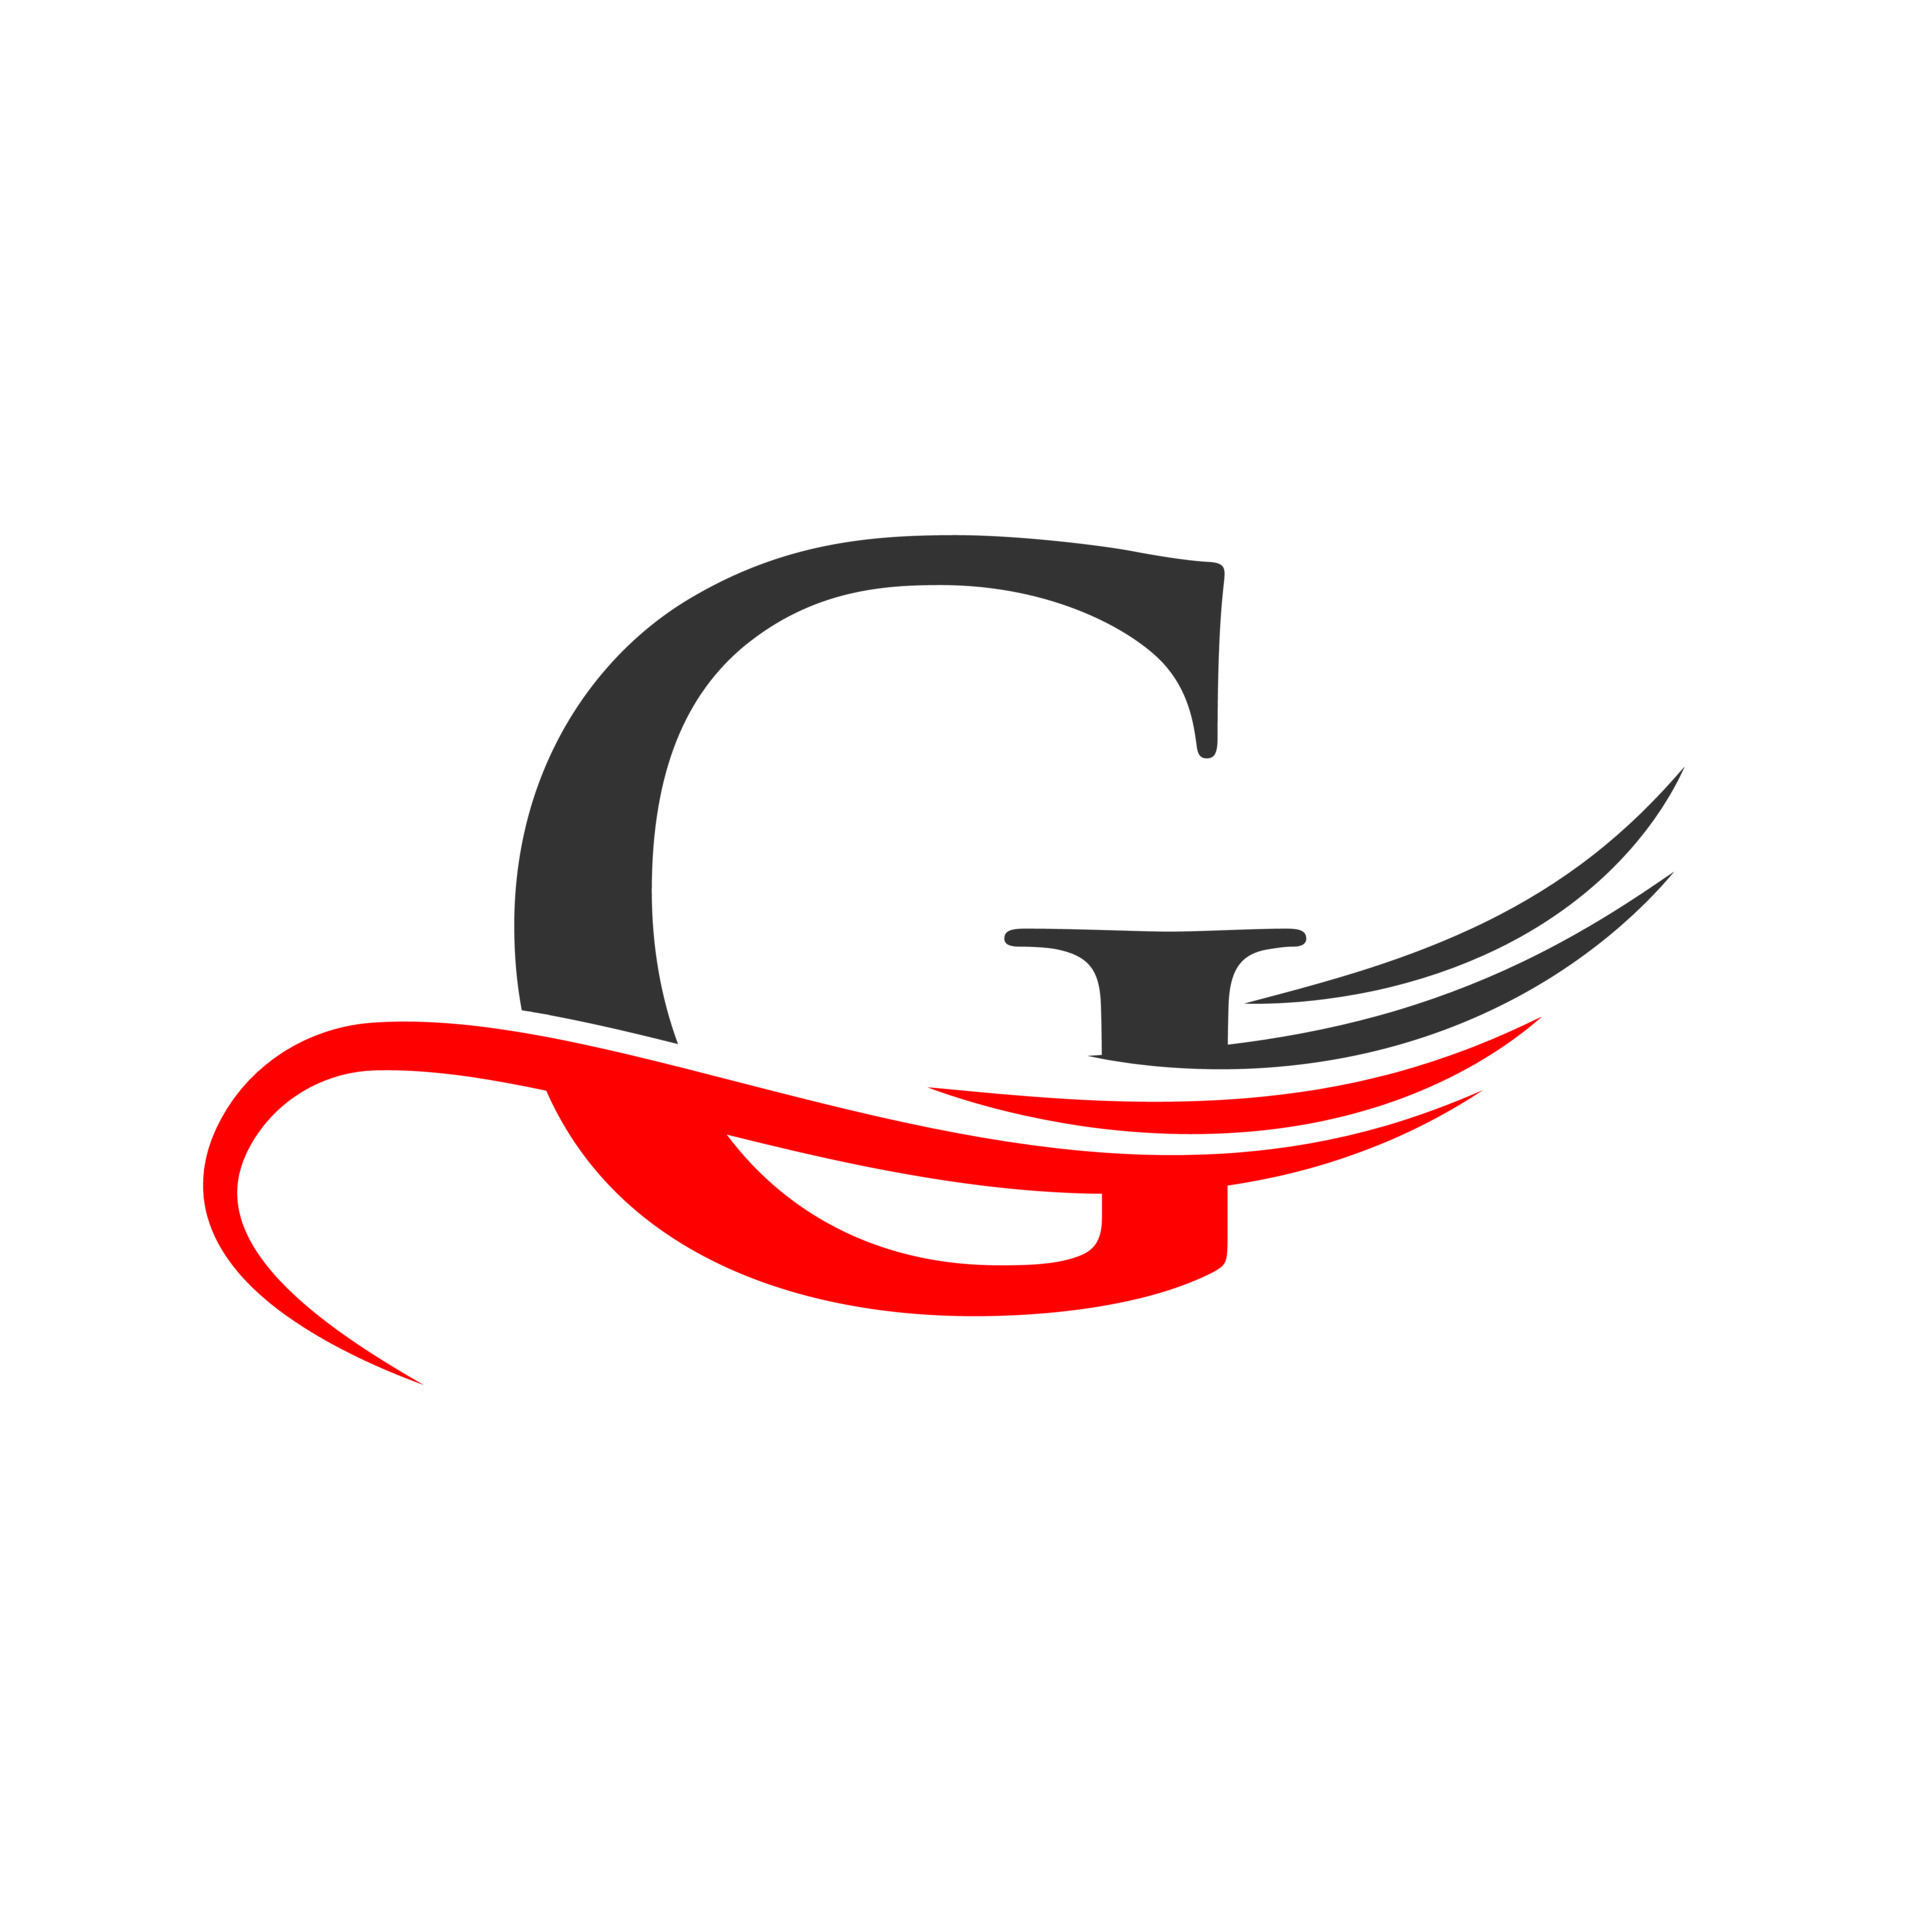 Letter G Wing Logo Design Template Concept With Fashion Wing Concept ...